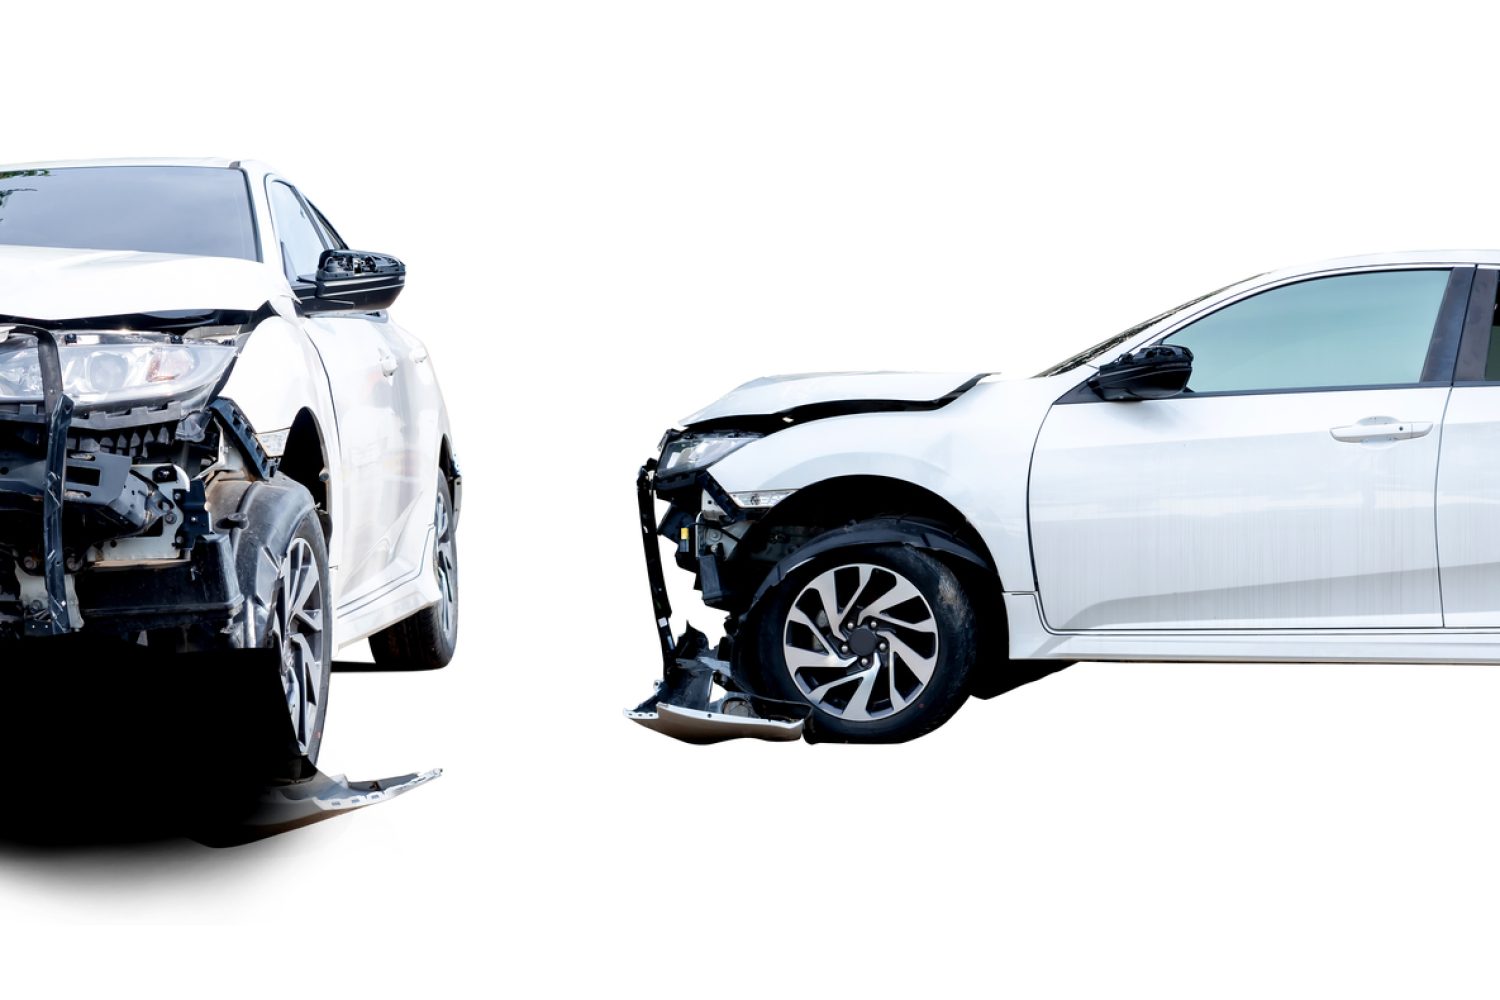 Front and side view  of white car get damaged by accident on the road. damaged cars after collision. Isolated on white background with clipping path